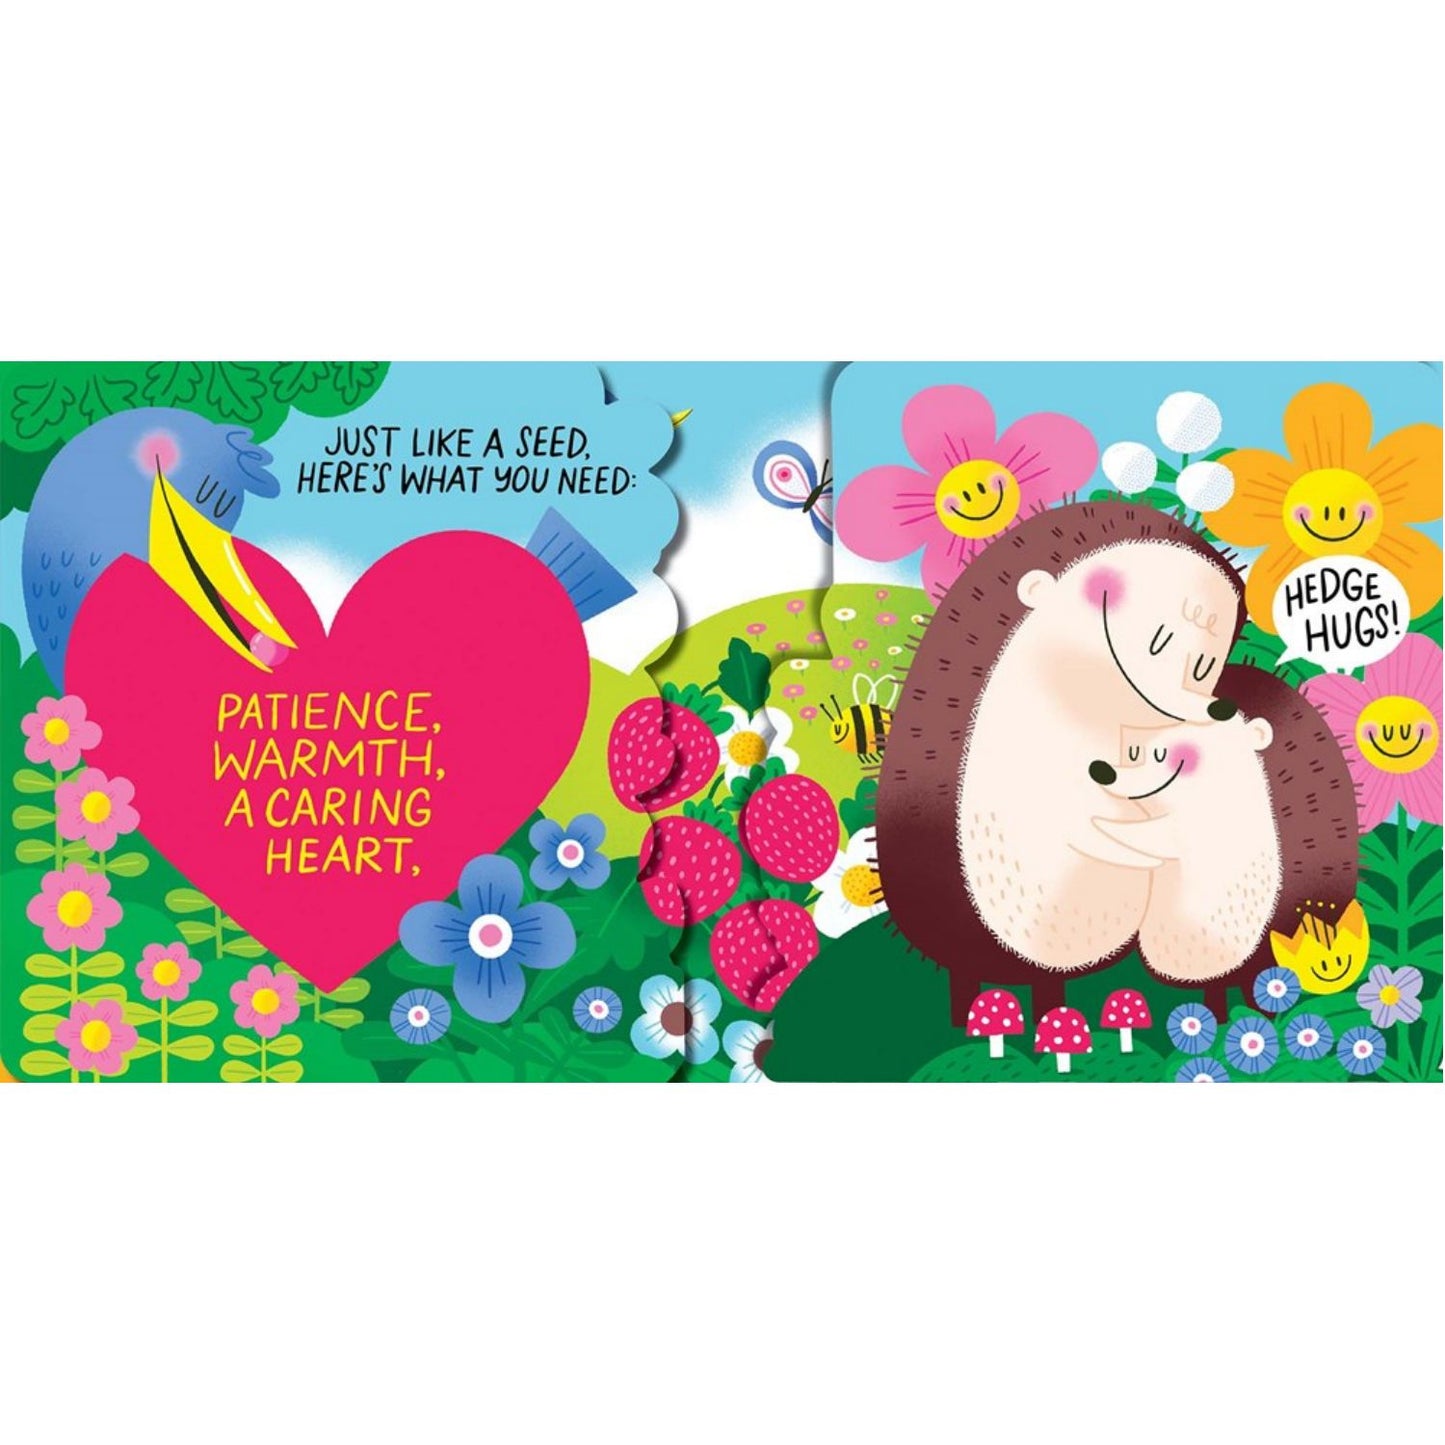 A Seed Will Grow | Interactive Board Book on Nature